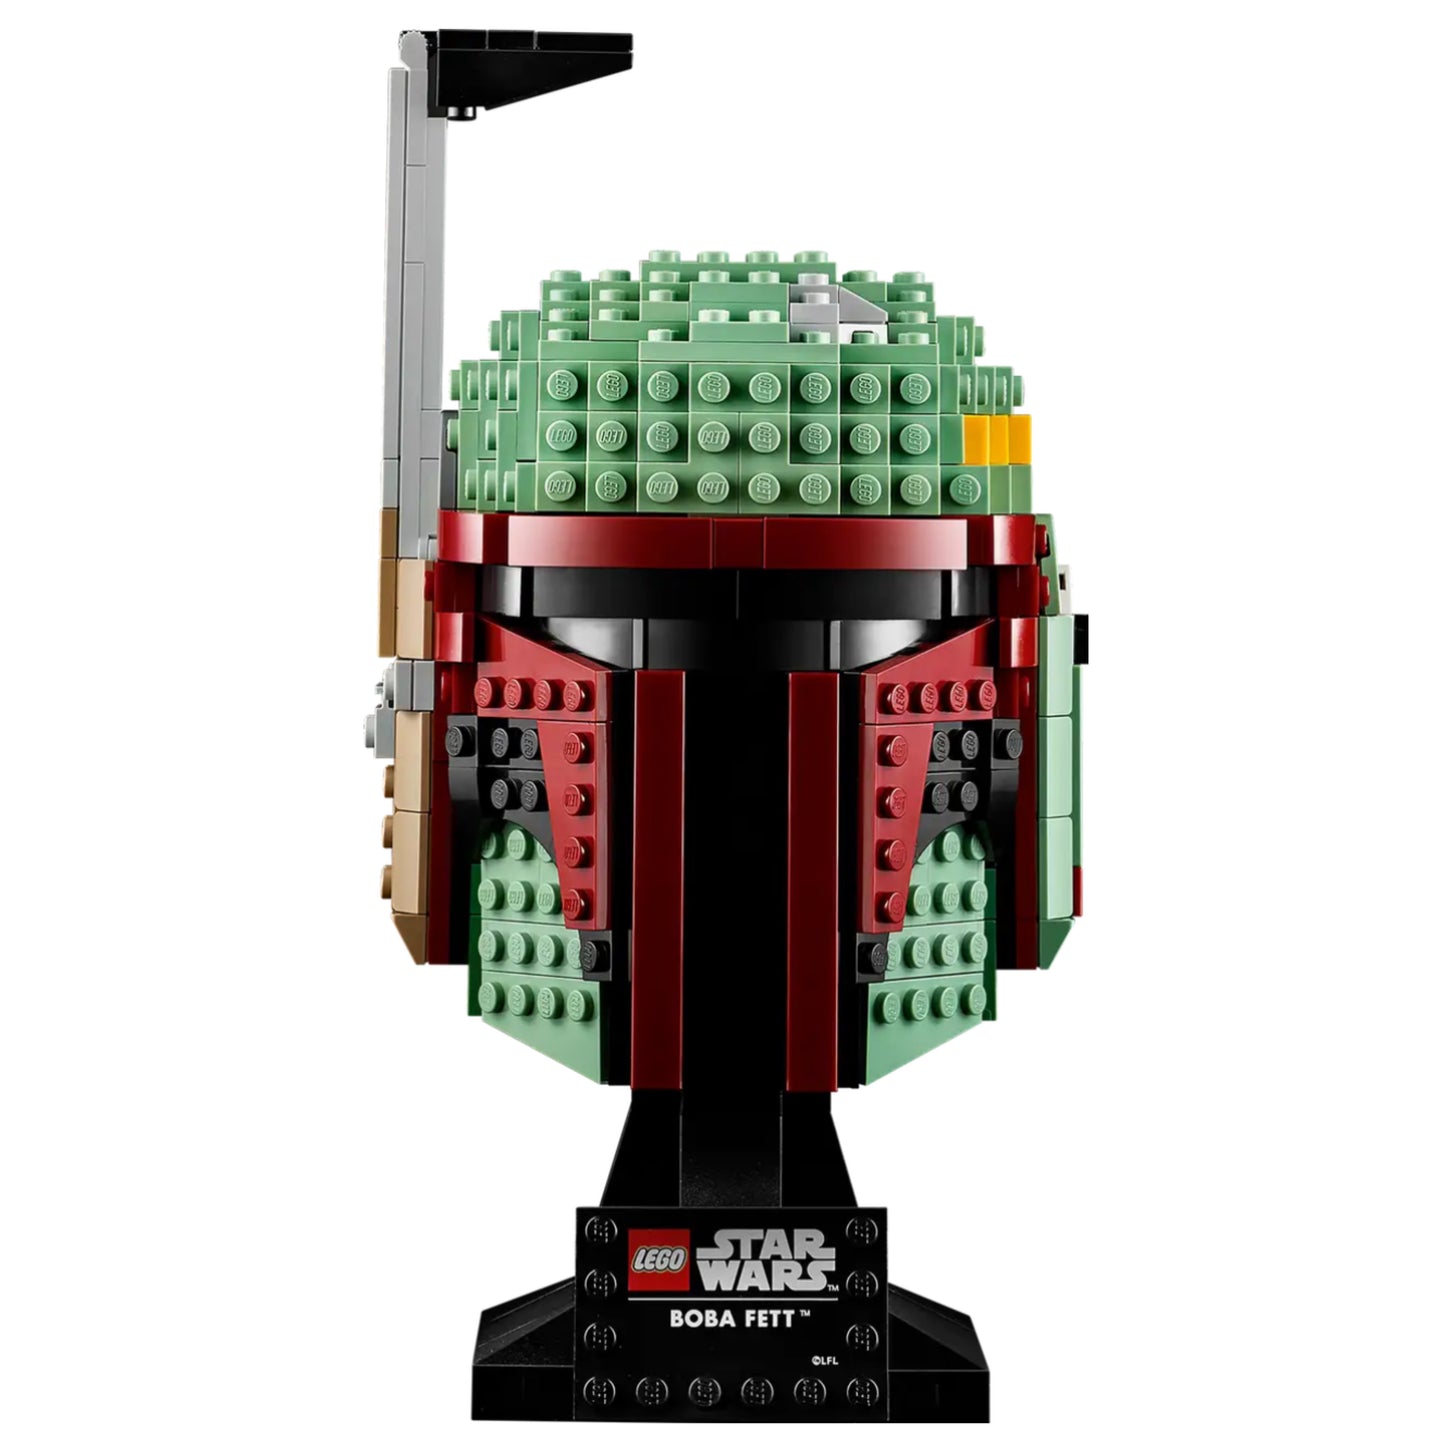 LEGO Star Wars Boba Fett Helmet 75277 Building Kit, Cool, Collectible Star Wars Character Building Set (625 Pieces), Multicolor